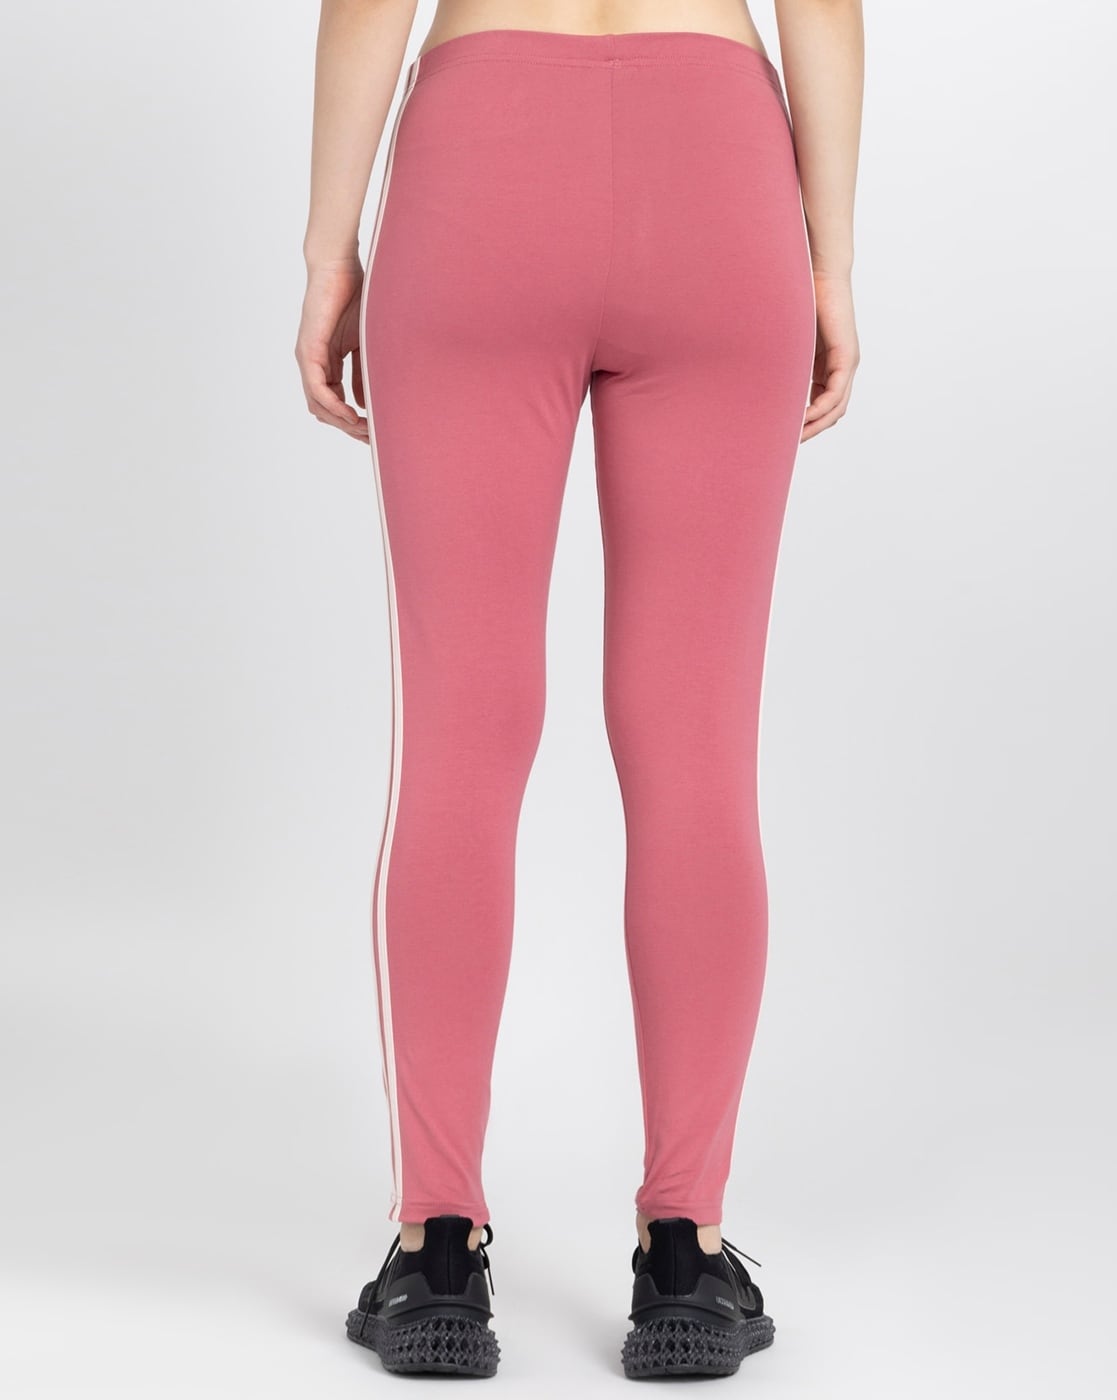 Buy Adidas Black Fitted TF 3S Tights for Women Online @ Tata CLiQ